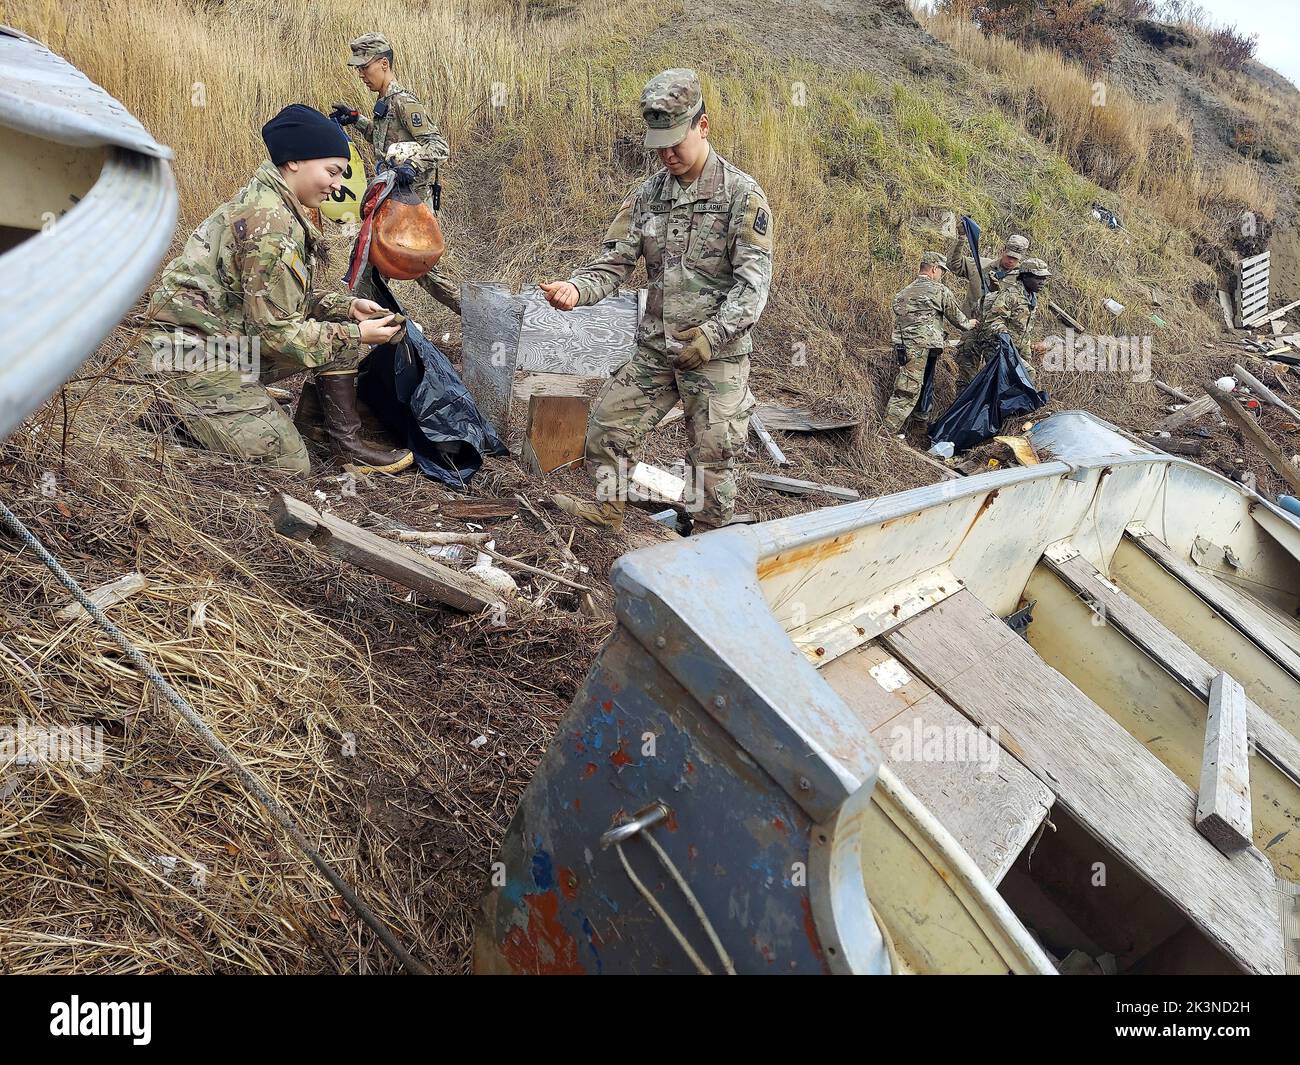 Chevak, United States. 26th Sep, 2022. U.S. soldiers with the Alaska National Guard assist with clean up following the aftermath of Typhoon Merbok, September 26, 2022 in Chevak, Alaska. The remote Native Alaskan coastal villages suffered damage from the remnants of the cyclone that caused flooding across more than 1,000 miles of Alaskan coastline. Credit: SrA Emily Batchelor/US Air Force/Alamy Live News Stock Photo